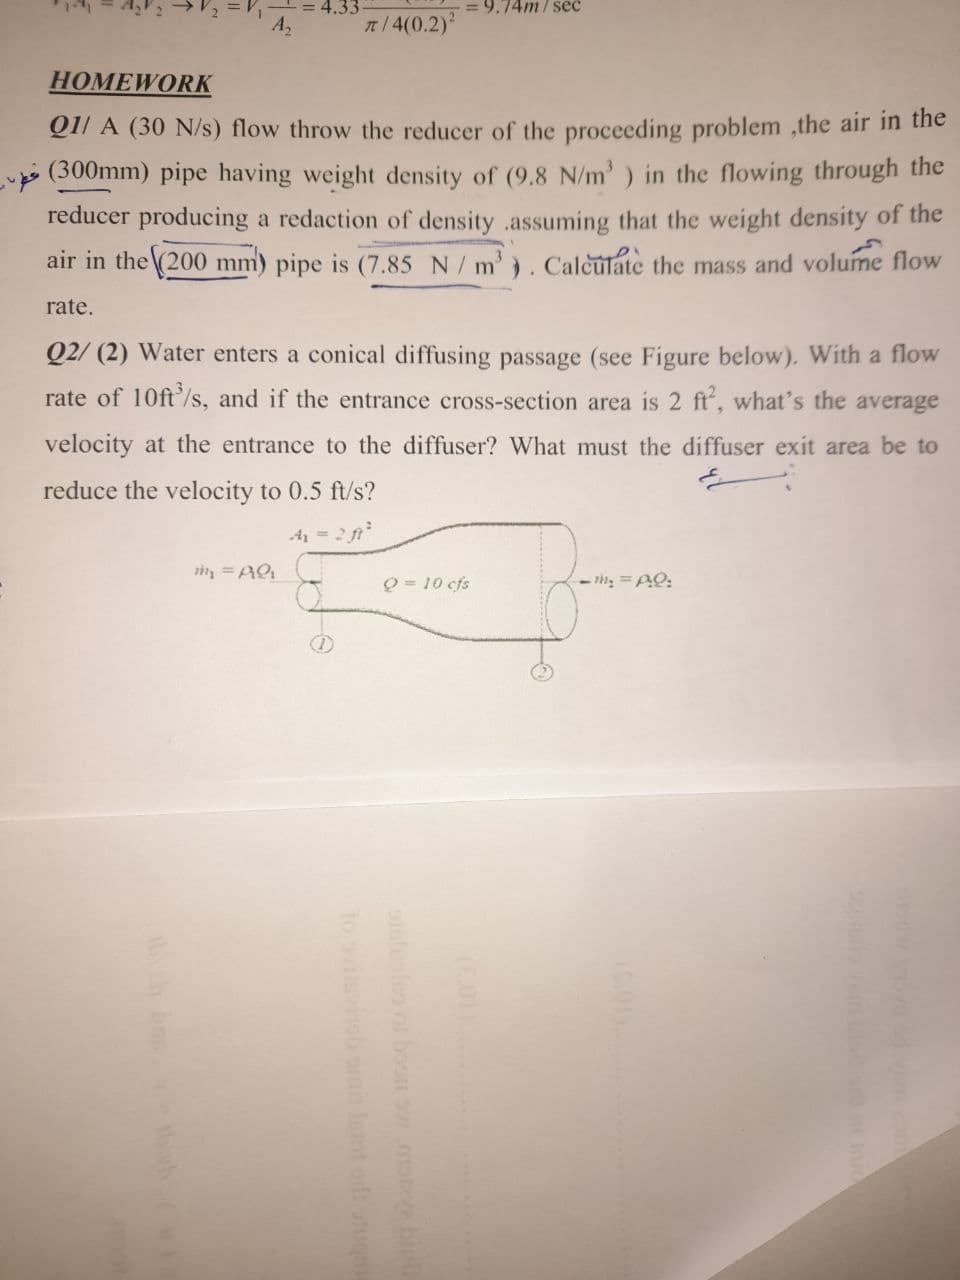 = 4.33
9.74m/ seć
n/ 4(0.2)2
HOMEWORK
Q1l A (30 N/s) flow throw the reducer of the proceeding problem ,the air in the
(300mm) pipe having weight density of (9.8 N/m' ) in the flowing through the
reducer producing a redaction of density .assuming that the weight density of the
air in the (200 mm) pipe is (7.85 N/ m'). Calèulate the mass and volume flow
rate.
Q2/ (2) Water enters a conical diffusing passage (see Figure below). With a flow
rate of 10ft'/s, and if the entrance cross-section area is 2 ft, what's the average
velocity at the entrance to the diffuser? What must the diffuser exit area be to
reduce the velocity to 0.5 ft/s?
4 = 2 f
Q = 10 cfs
- m = AQ:
oiclooleo or boon ow.matve binl
to sinsb omit letot odi stum
hn th .C
